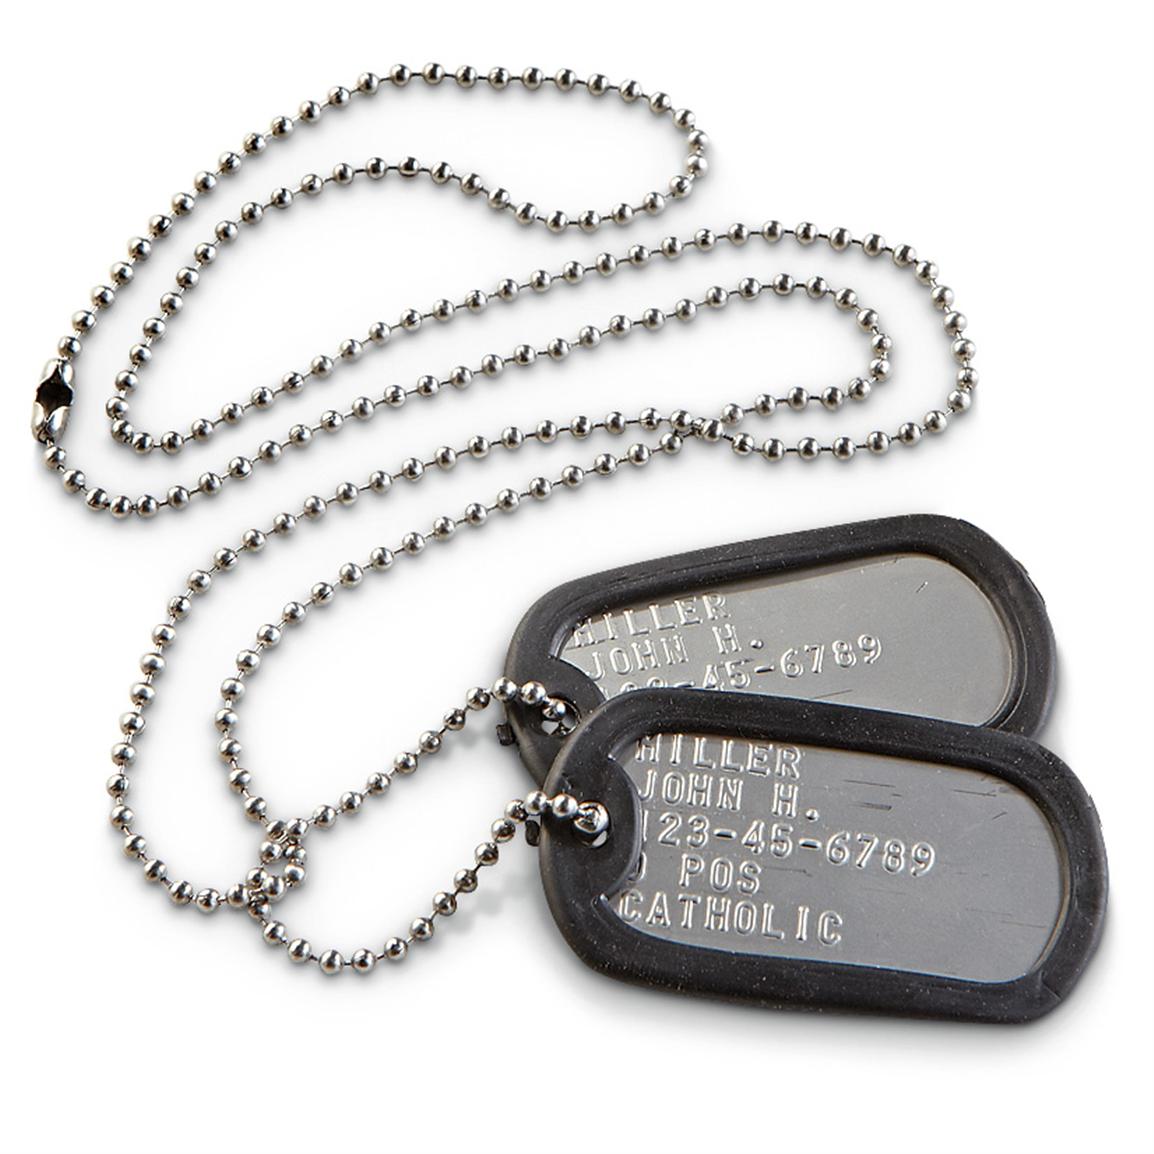 Customizable Military Dog Tags, 2 Pack 222774, Personal Accessories